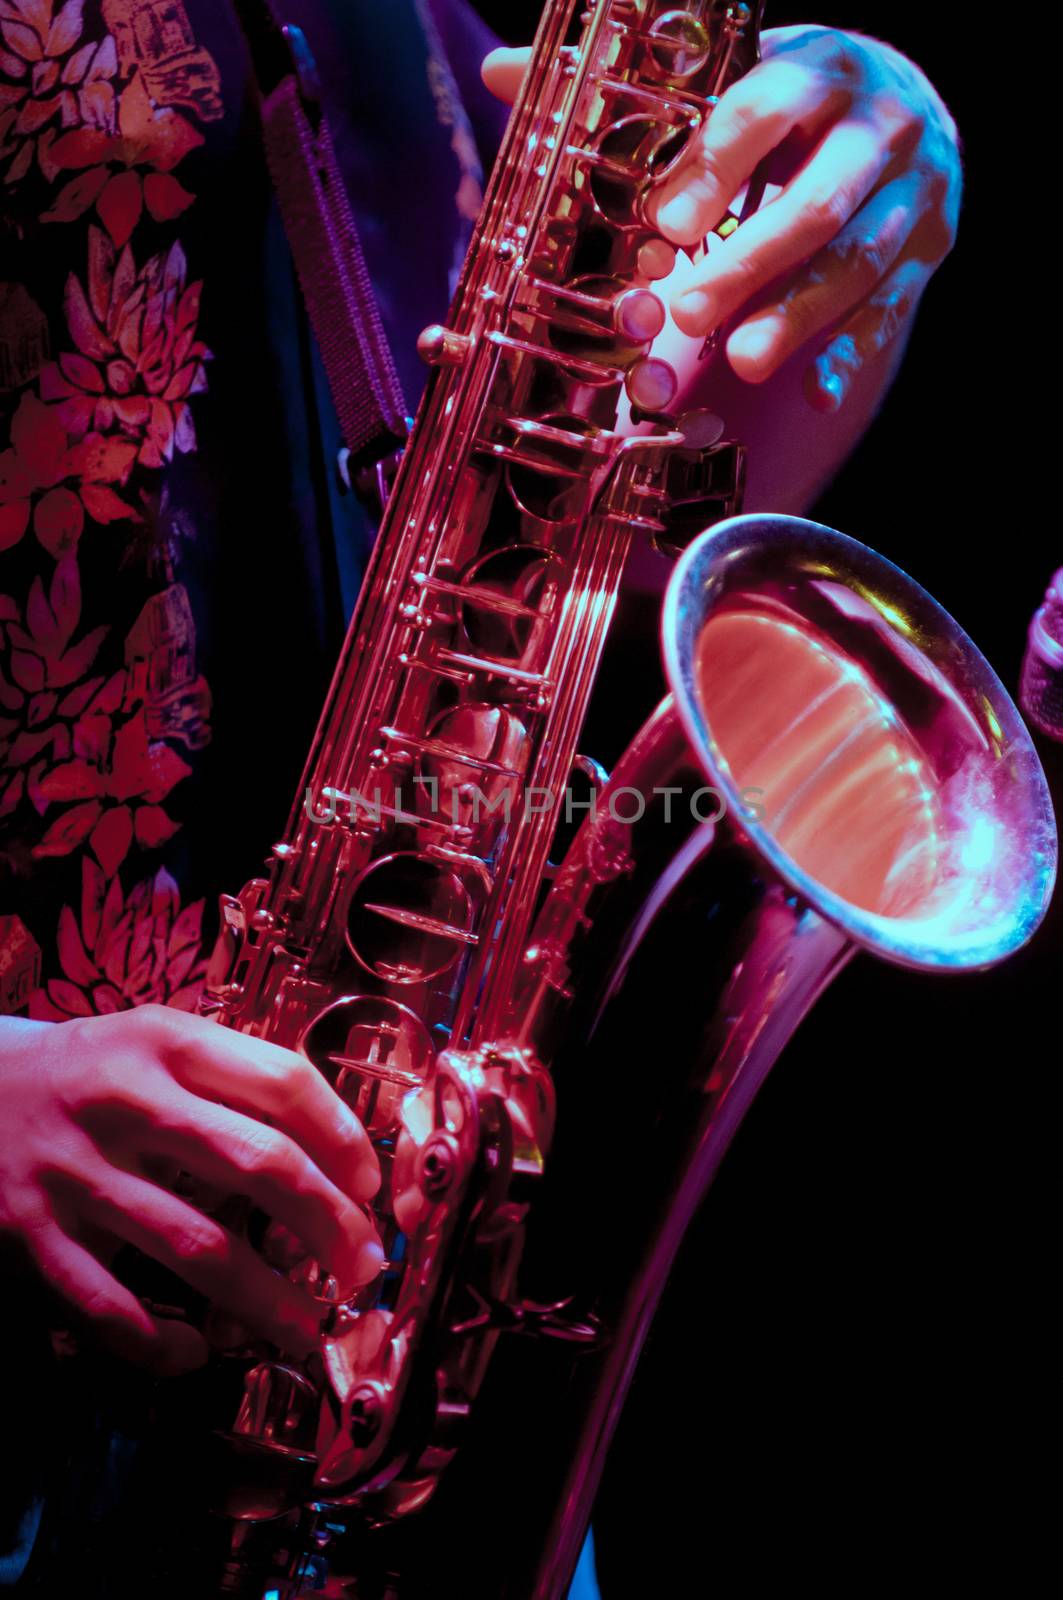 saxophone player in live perfomance, on stage